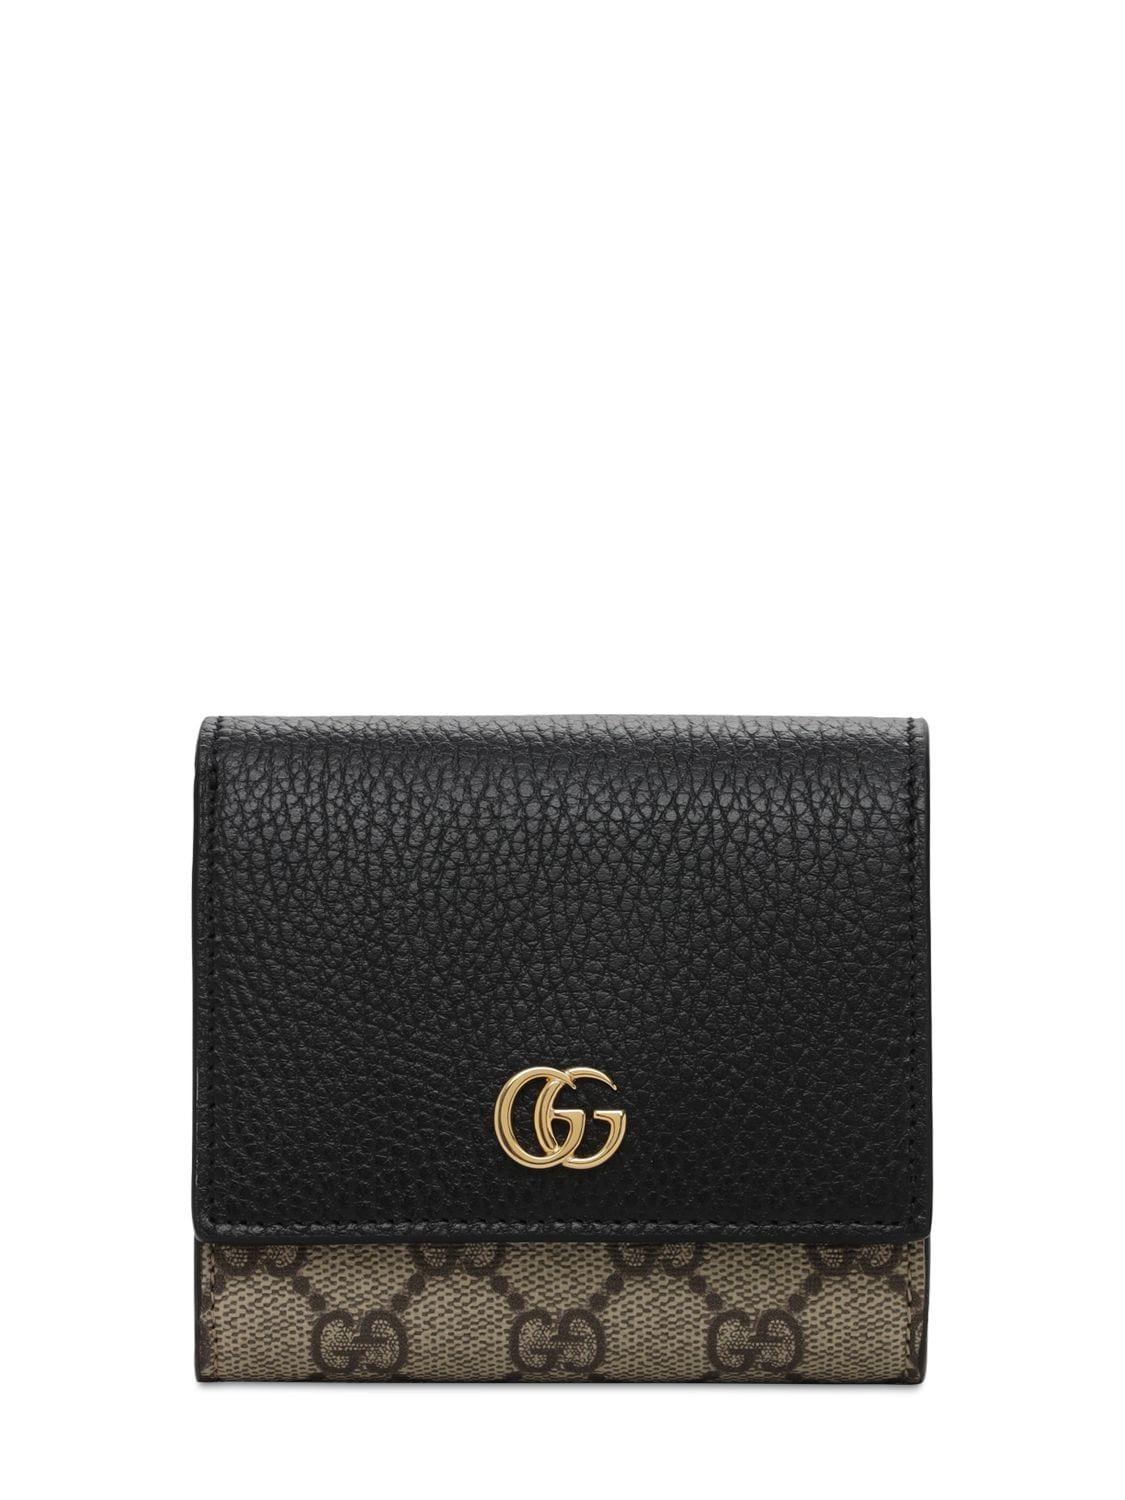 Gucci Marmont Textured-leather Coin Purse - Black